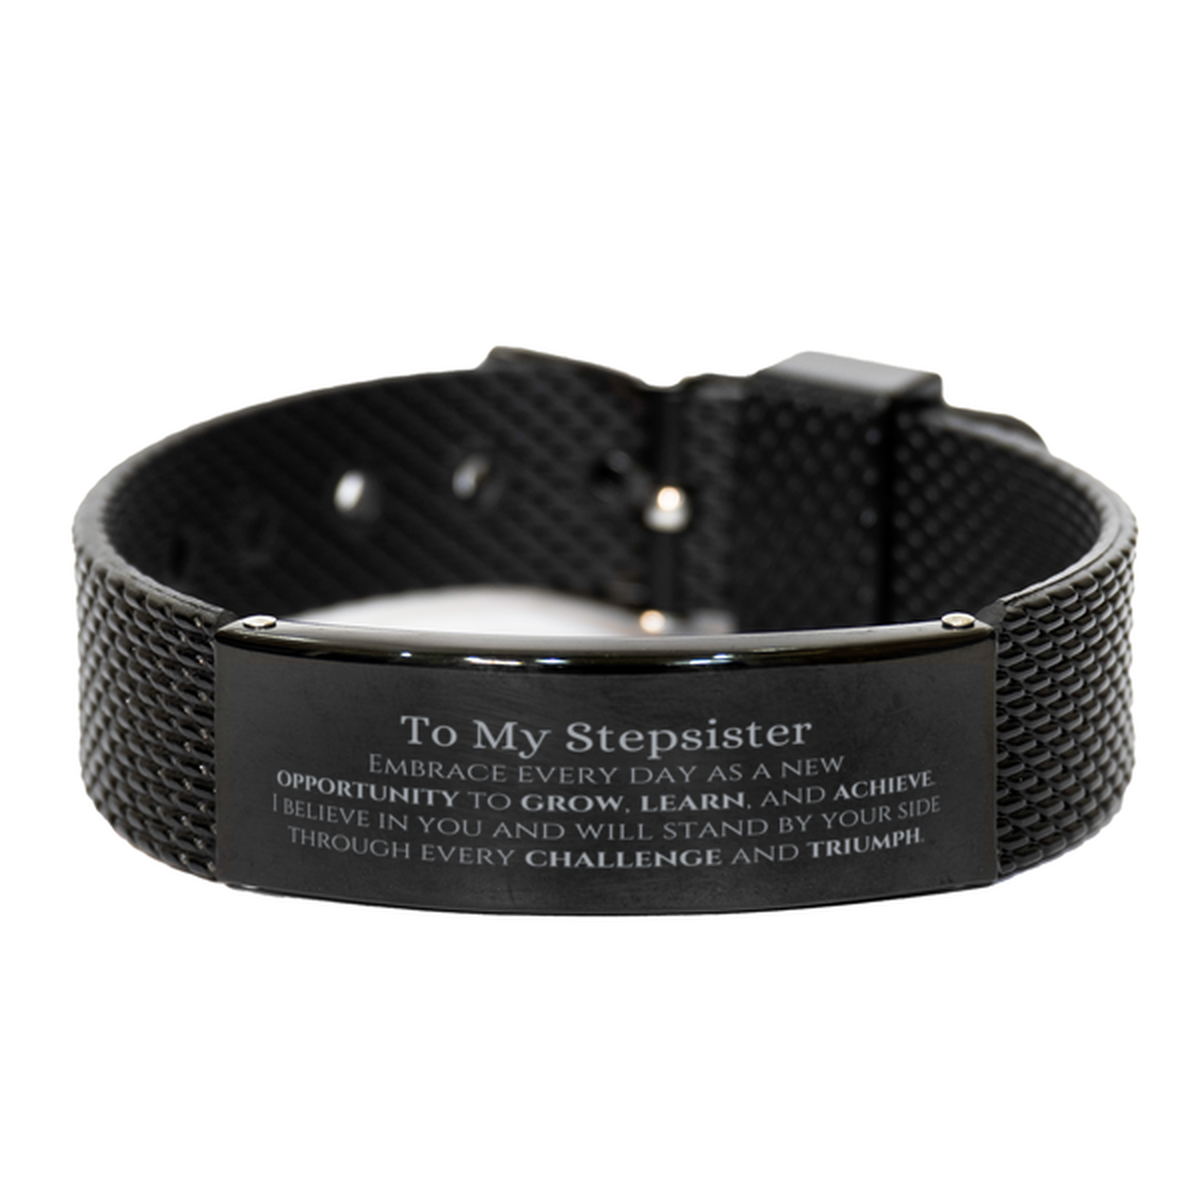 To My Stepsister Gifts, I believe in you and will stand by your side, Inspirational Black Shark Mesh Bracelet For Stepsister, Birthday Christmas Motivational Stepsister Gifts